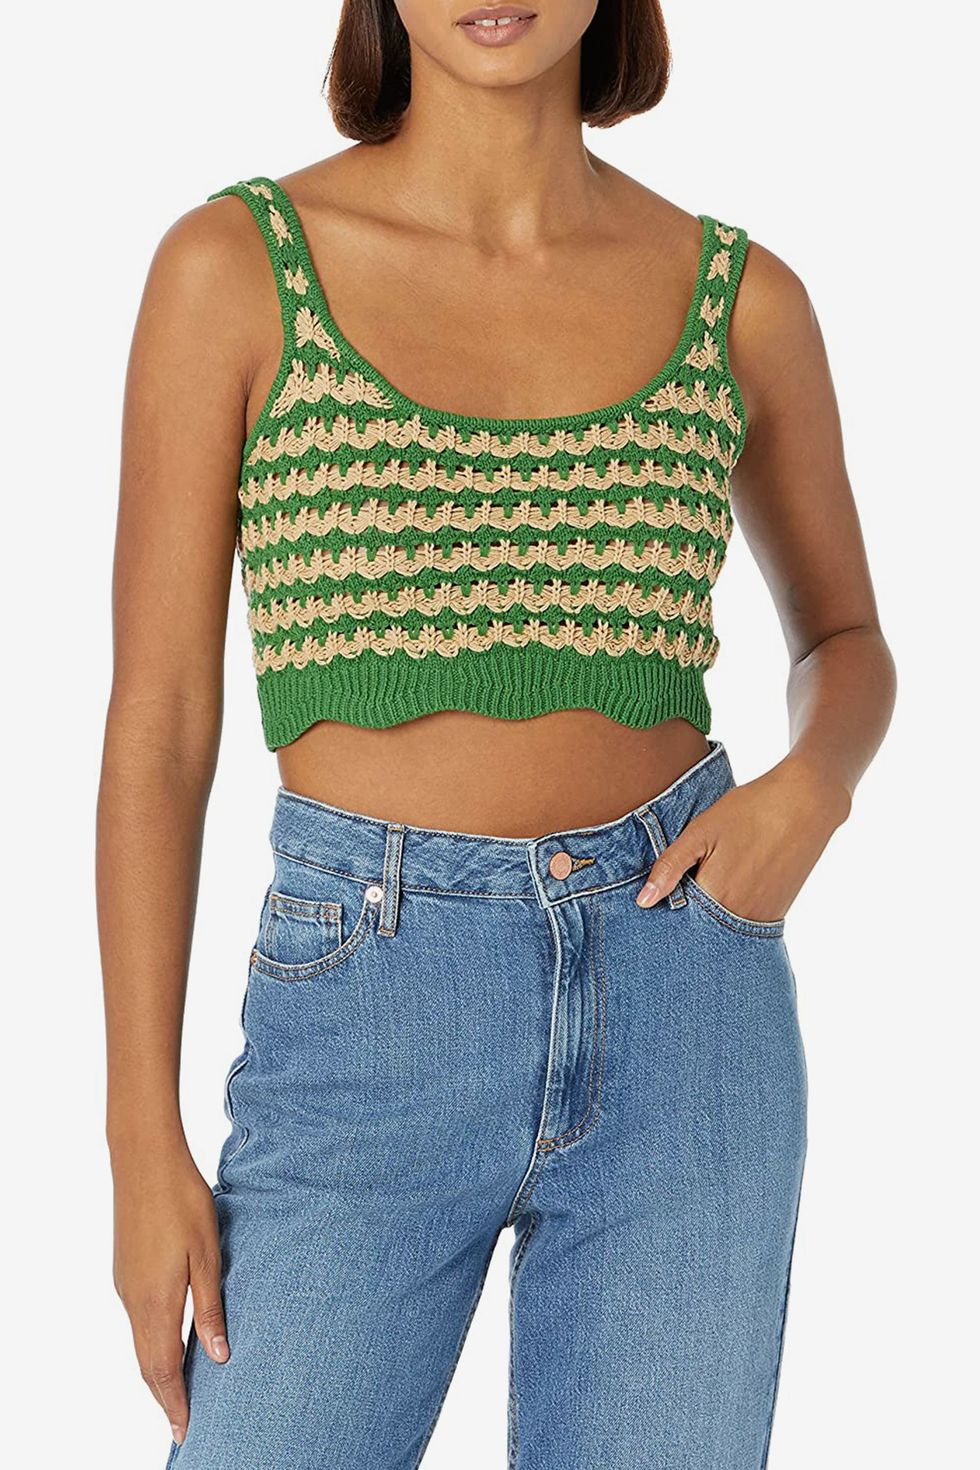 Stylish Crochet Crop Top for Fashionable Summer Looks